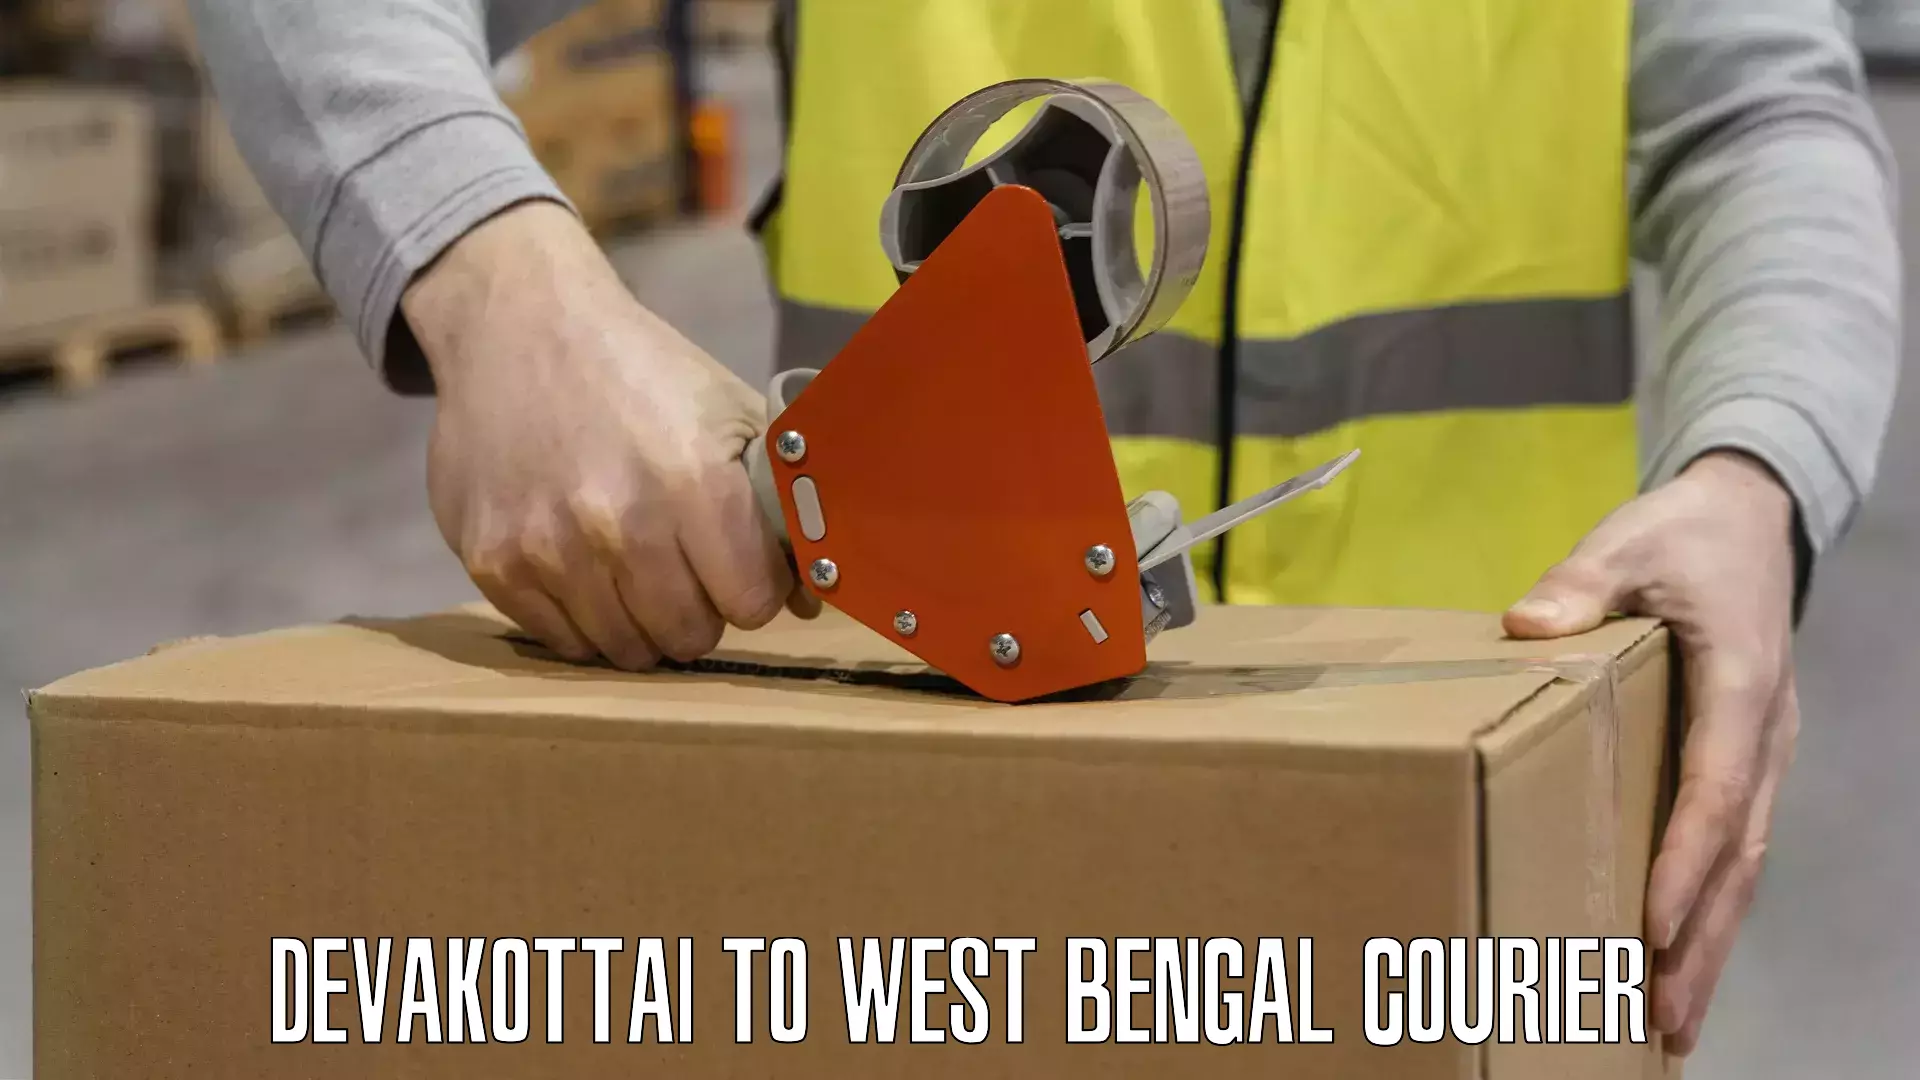 State-of-the-art courier technology Devakottai to West Bengal